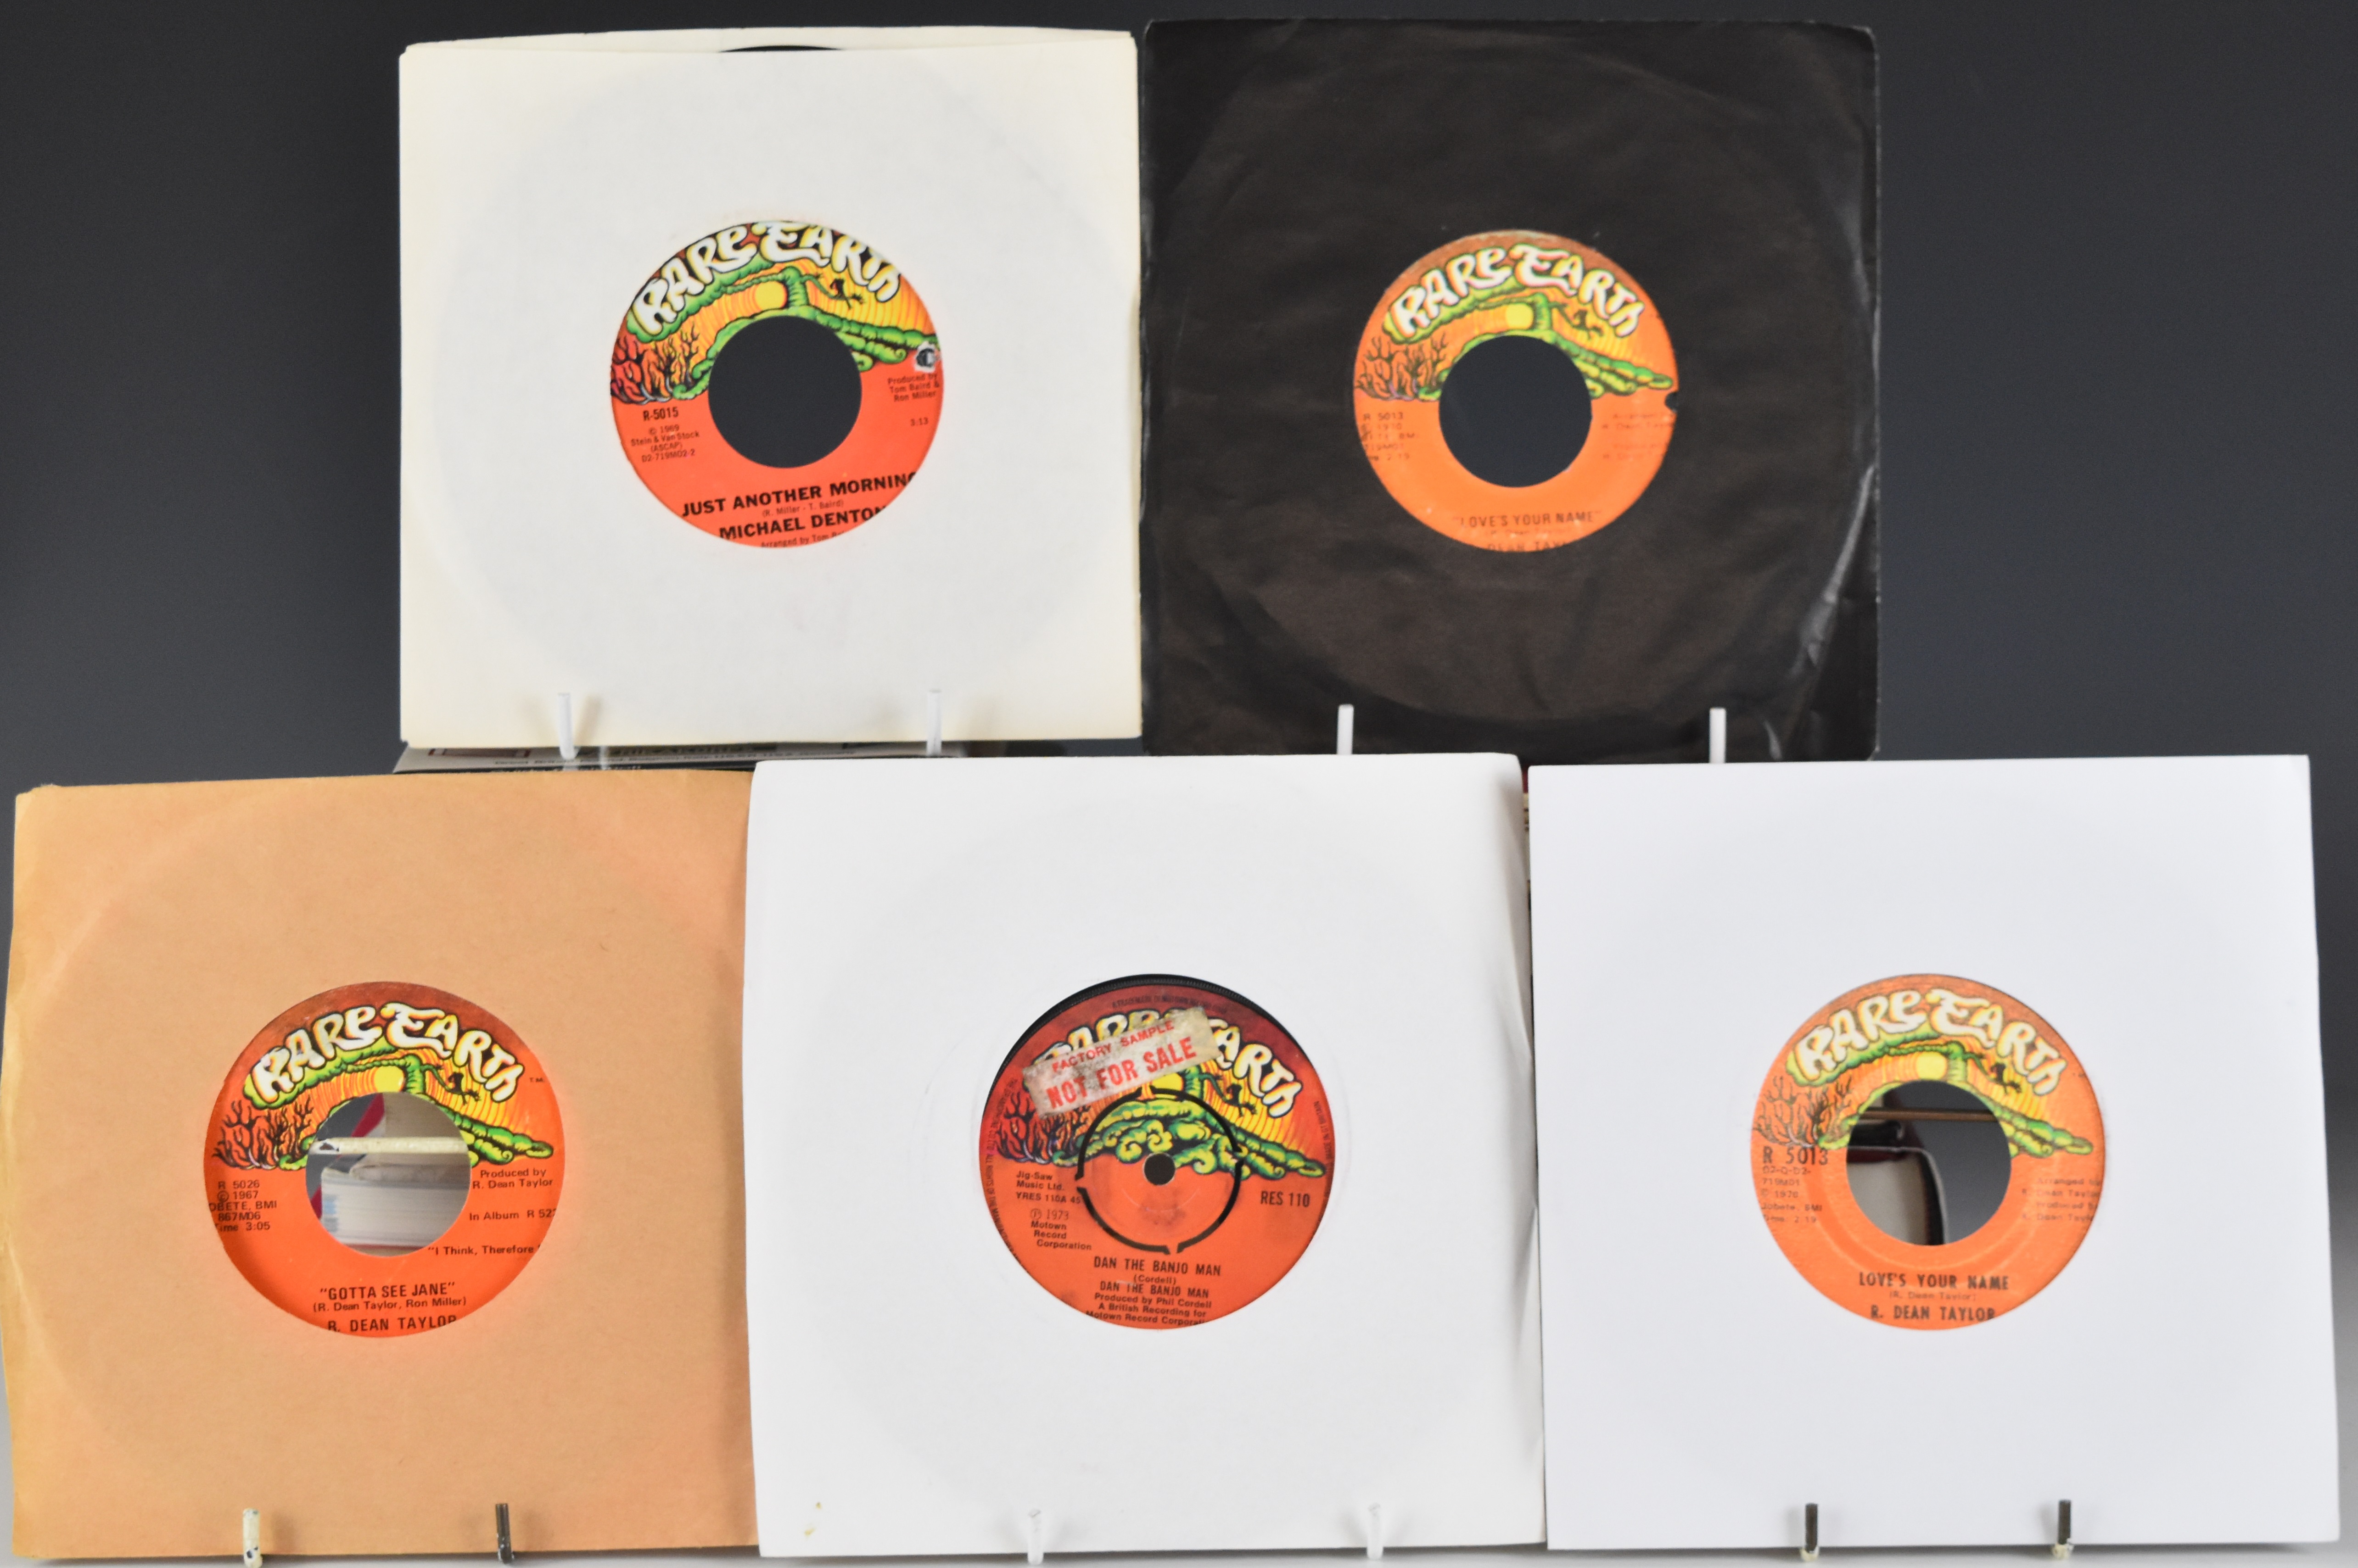 Collection of 27 Rare Earth 7" singles from Berry Gordy's Tamla Motown stable including one Demo, - Bild 2 aus 3